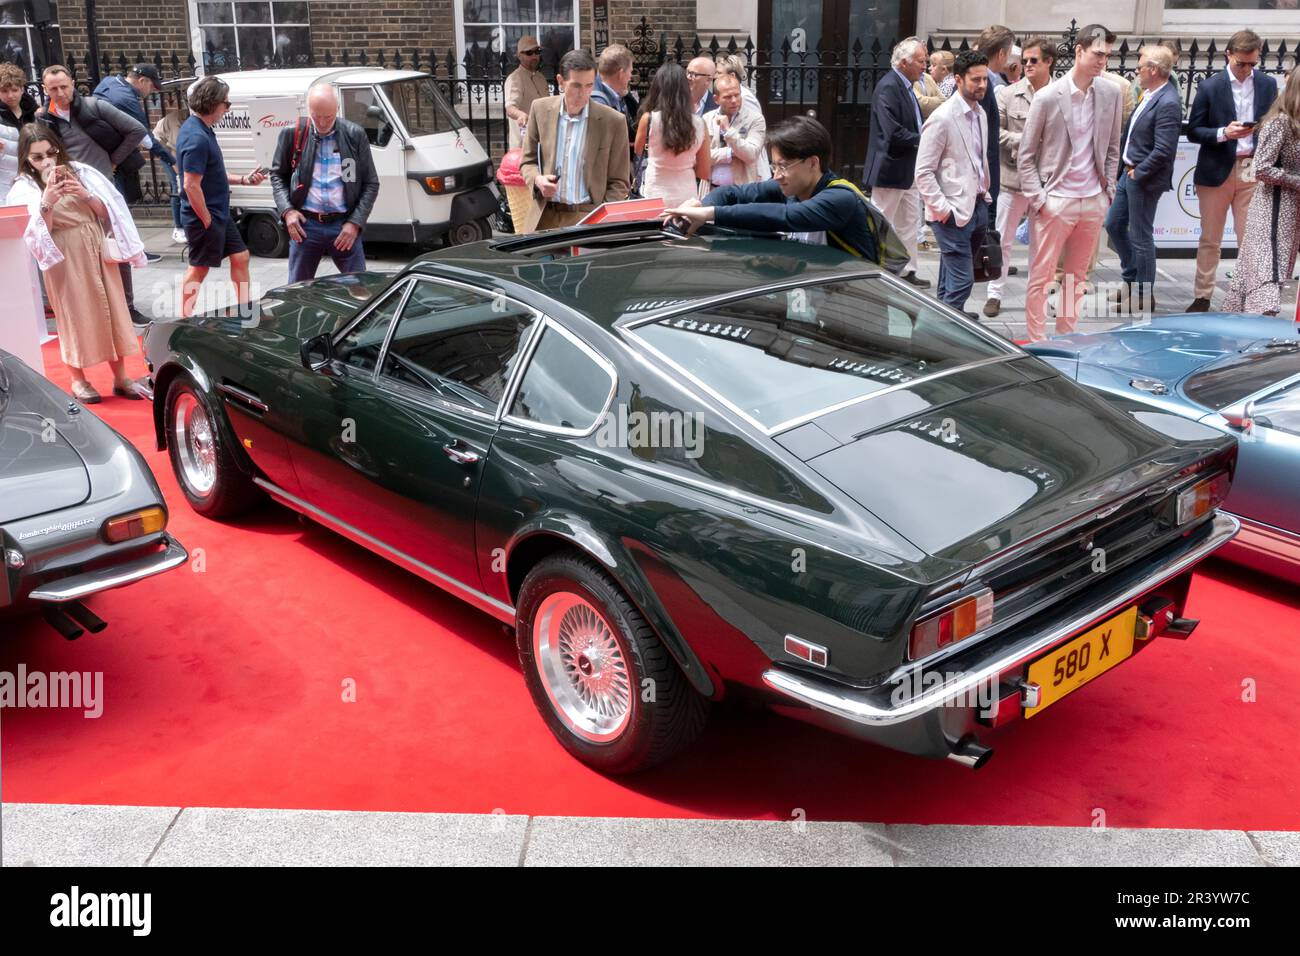 1991 Aston Martin V8 vantage at the Concours on Savile Row 2023. Classic car concours on the famous street for Tailoring in London UK Stock Photo